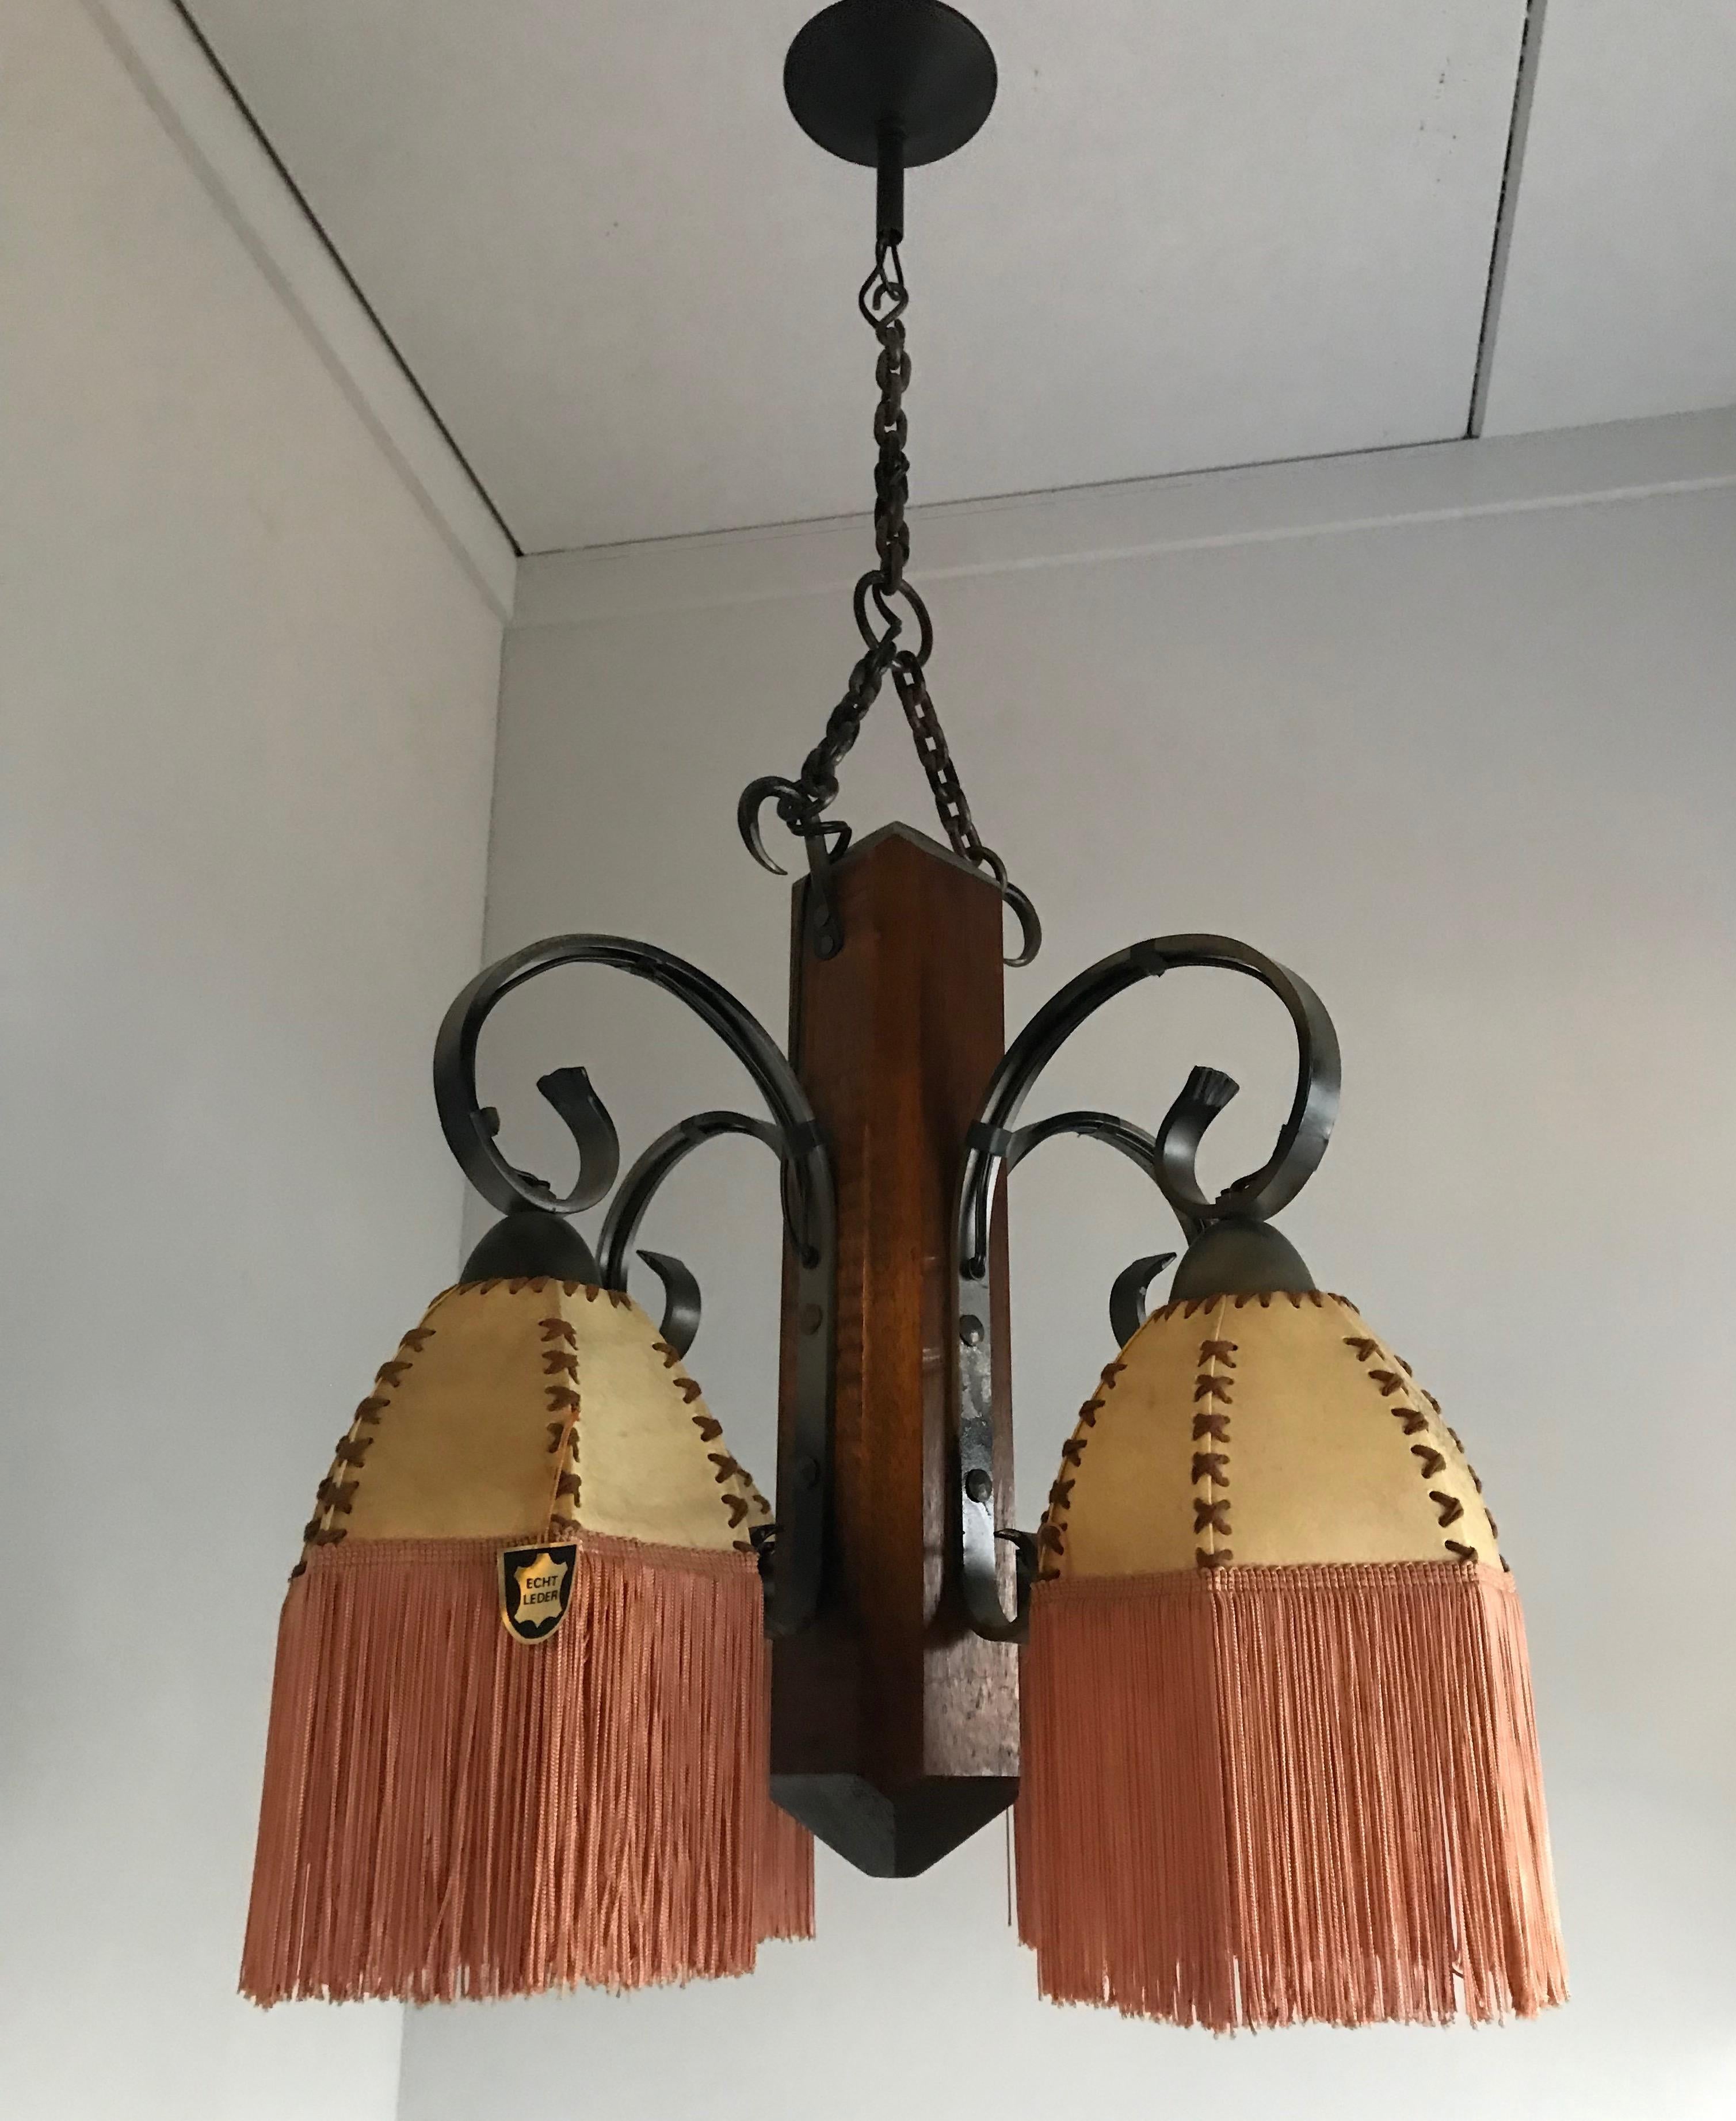 European Rare Wrought Iron and Wood Pendant Light Fixture with Leather Shades and Fringes For Sale